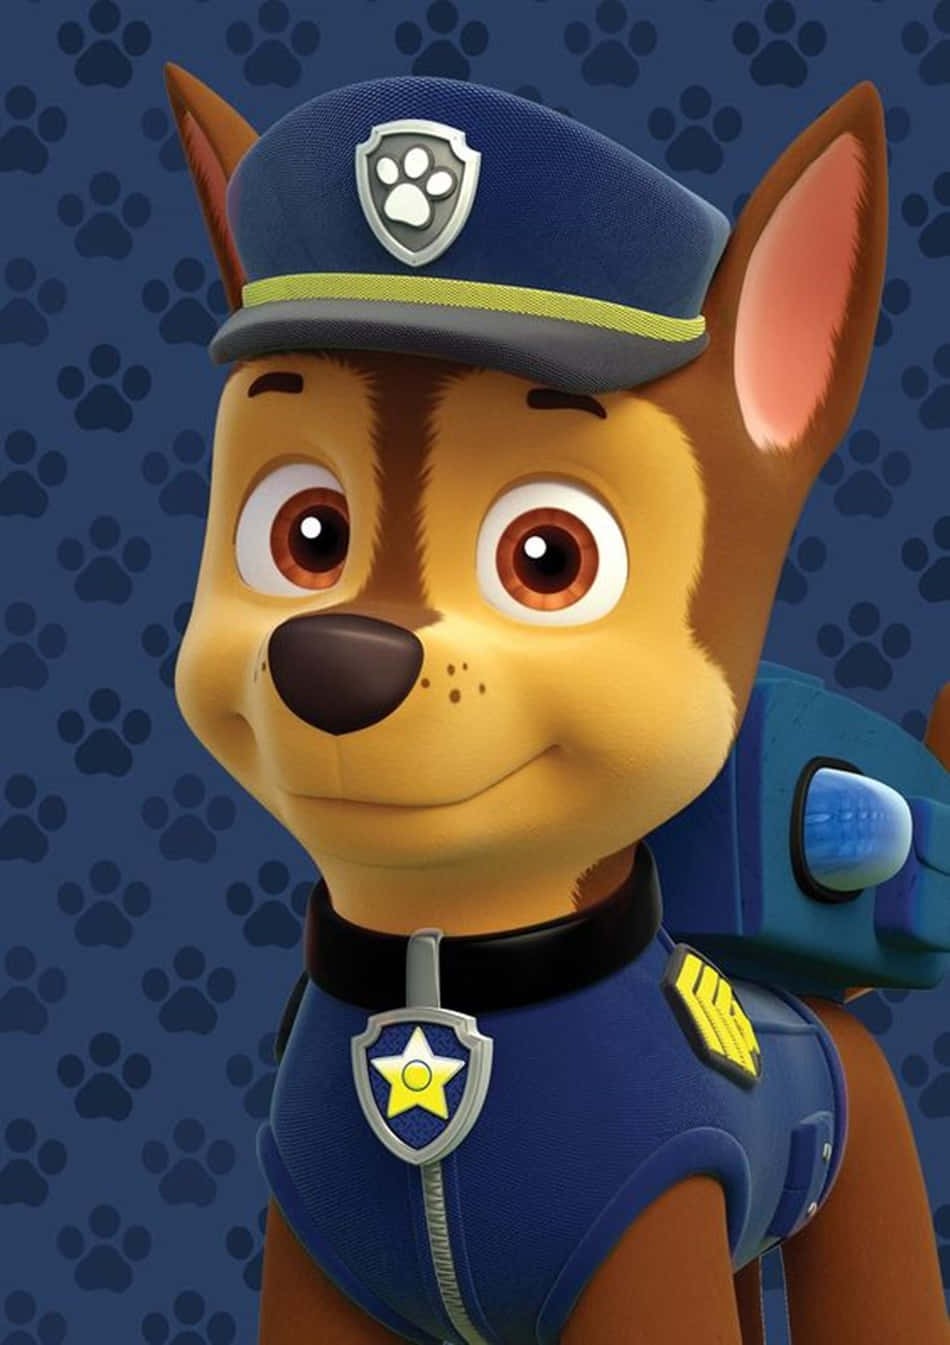 Chase from Paw Patrol is Ready for Adventure! Wallpaper